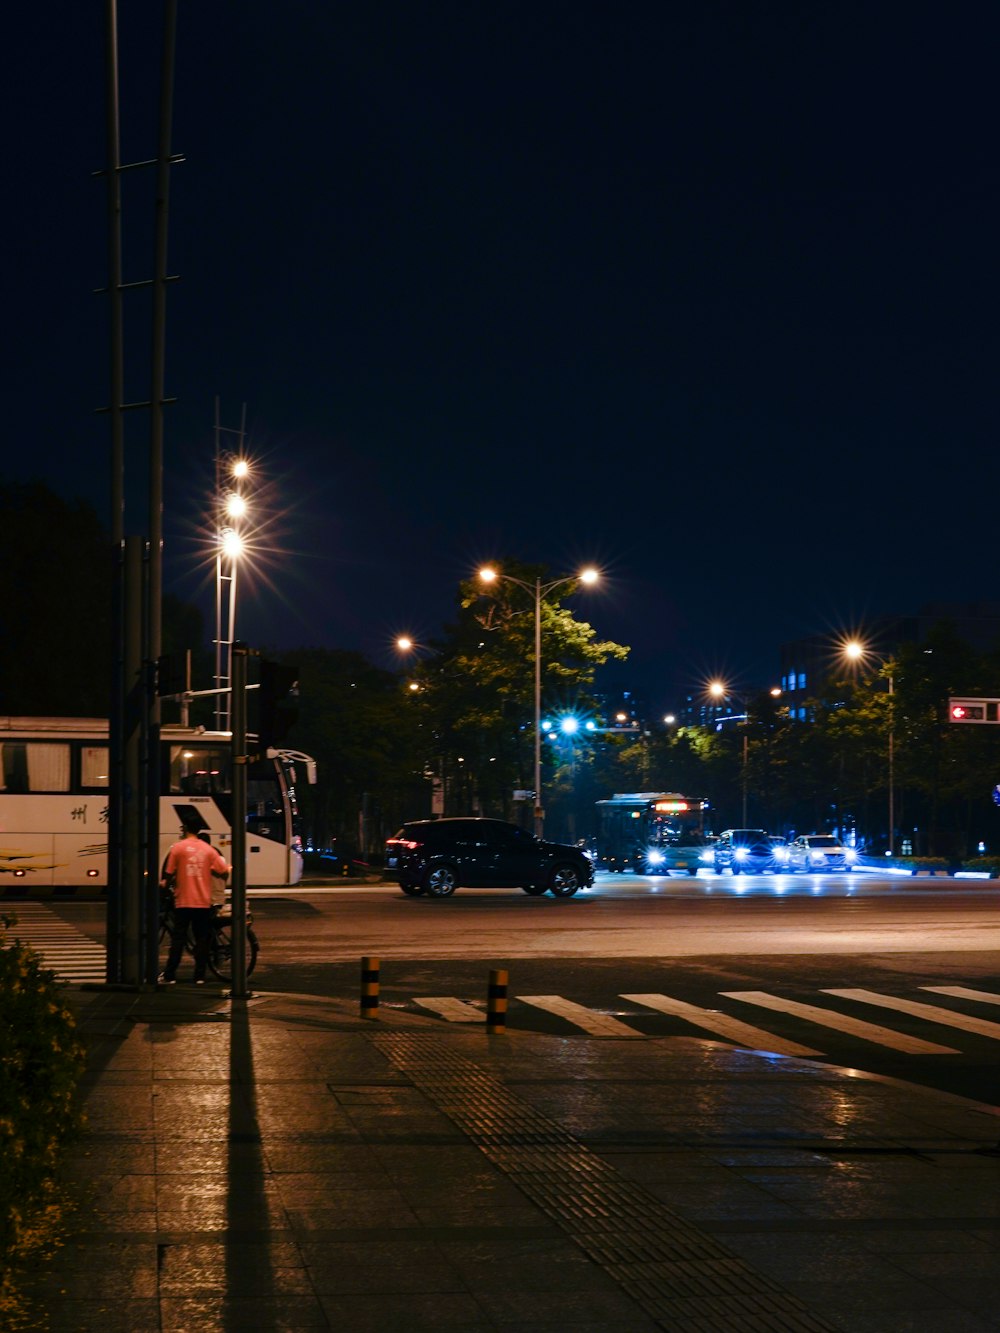 a man standing on a street corner at night